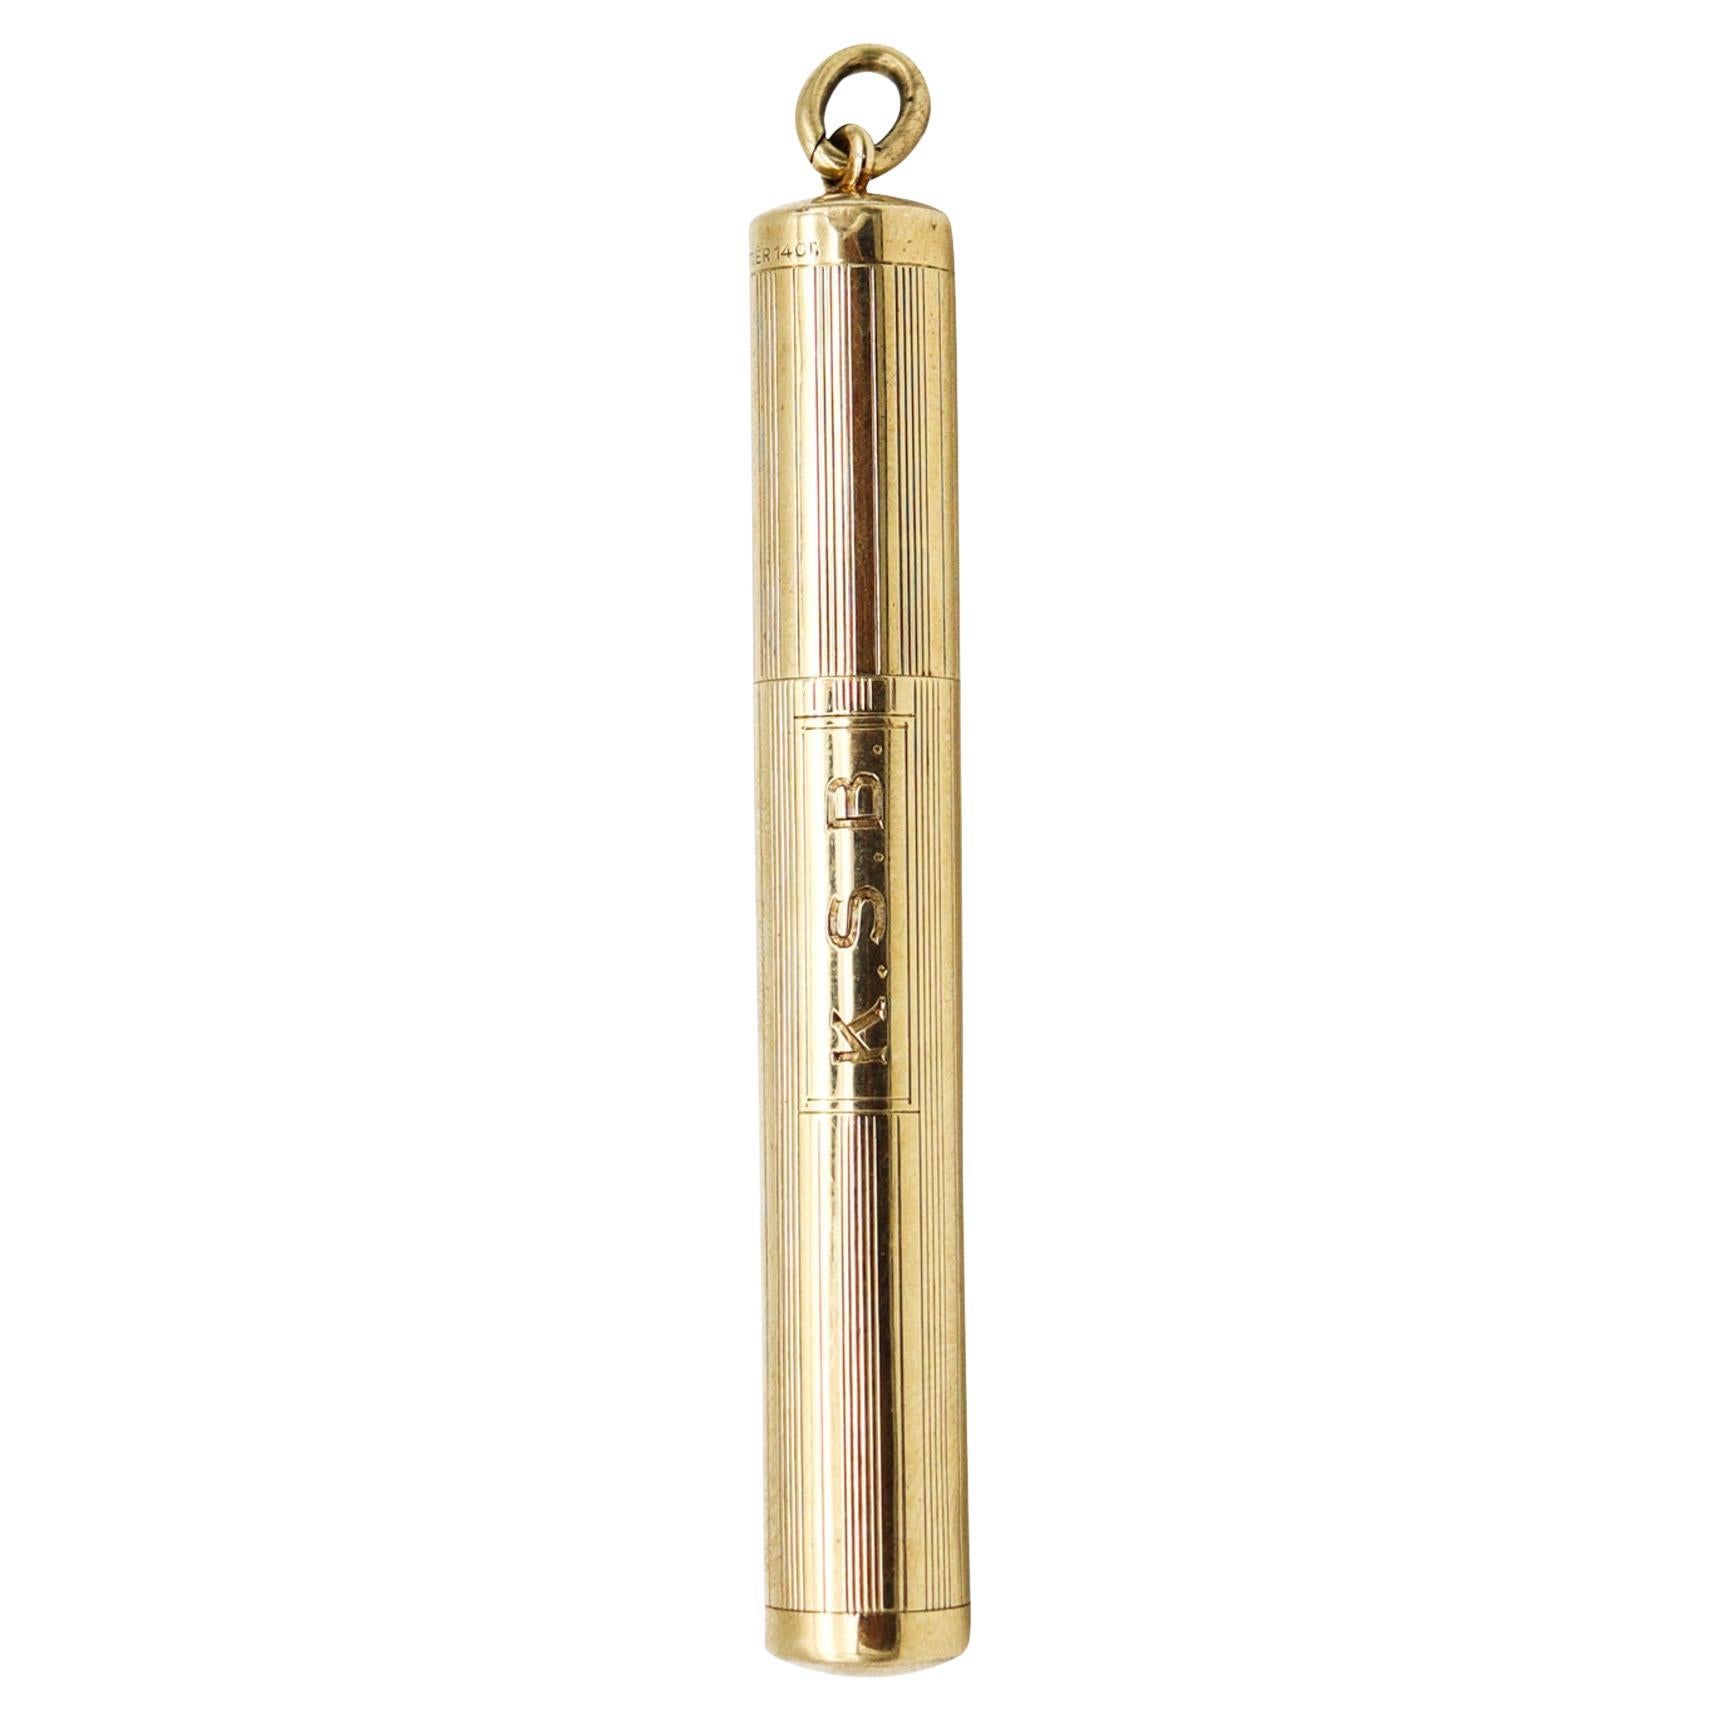 Cartier 1935 Art Deco Cylindrical Petrol Lighter Pendant In 14Kt Yellow Gold